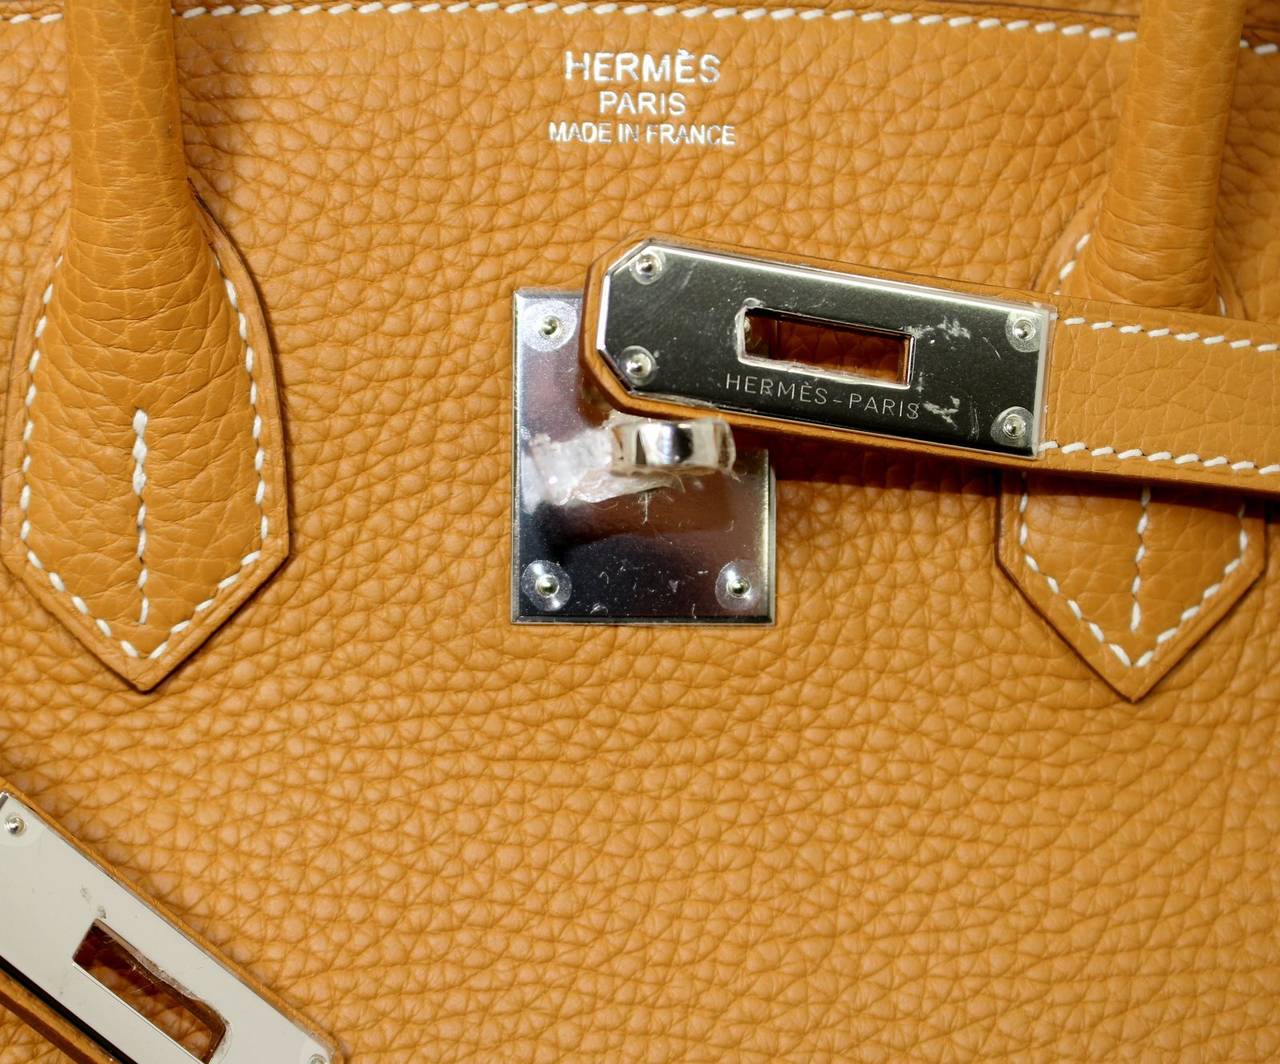 Hermes Fjord Leather Birkin Bag- 35 cm in Sable Brown with PHW For Sale 2